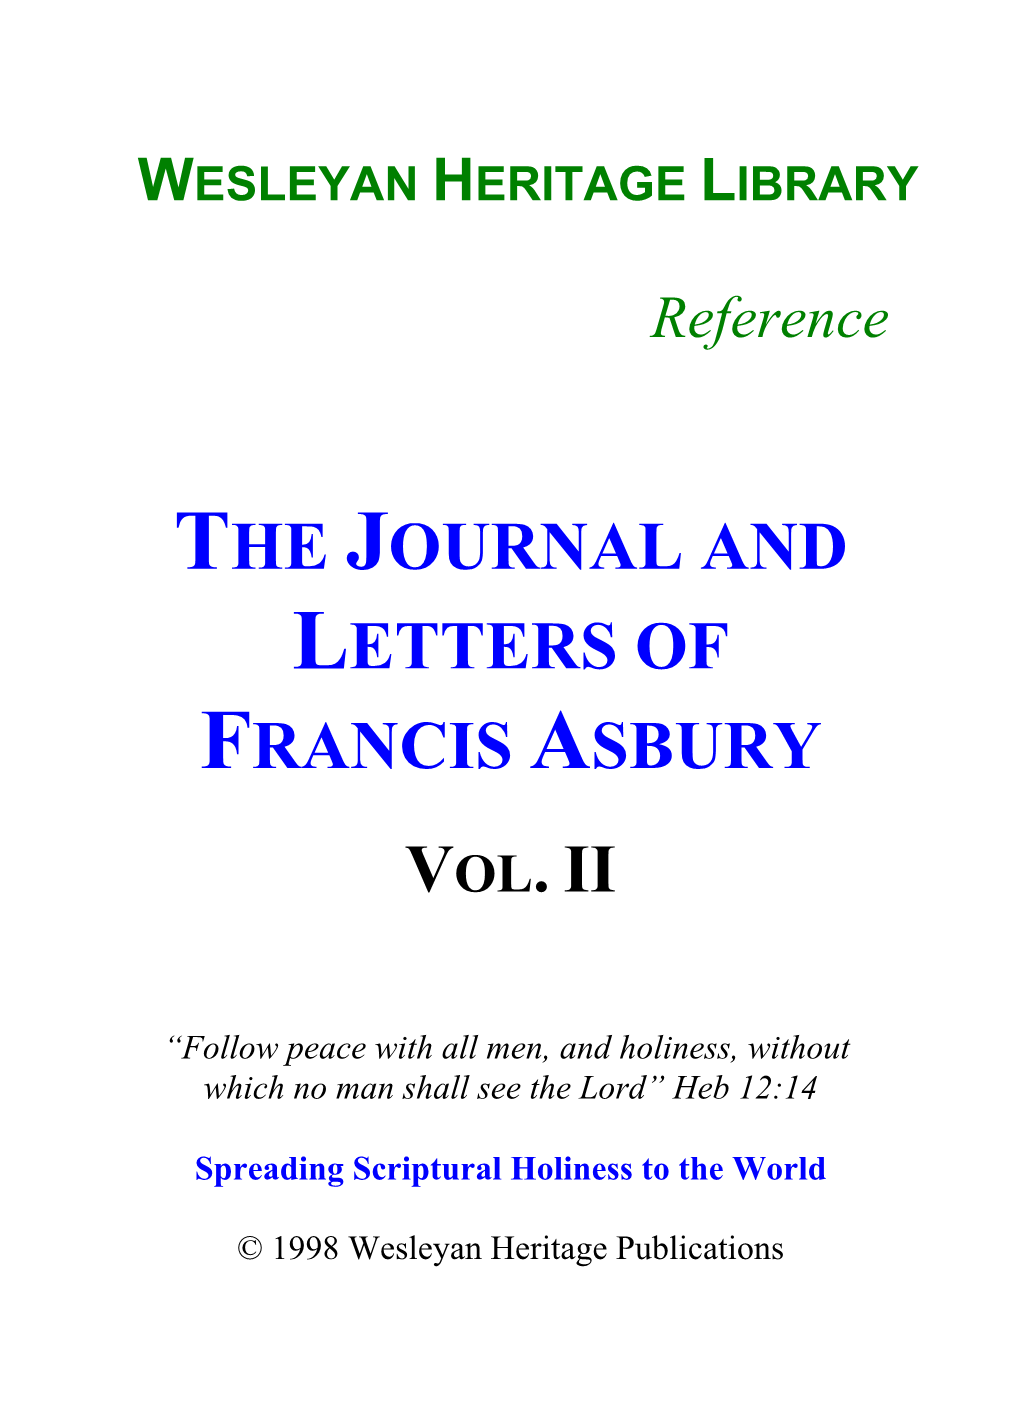 The Journal and Letters of Francis Asbury, Vol. II